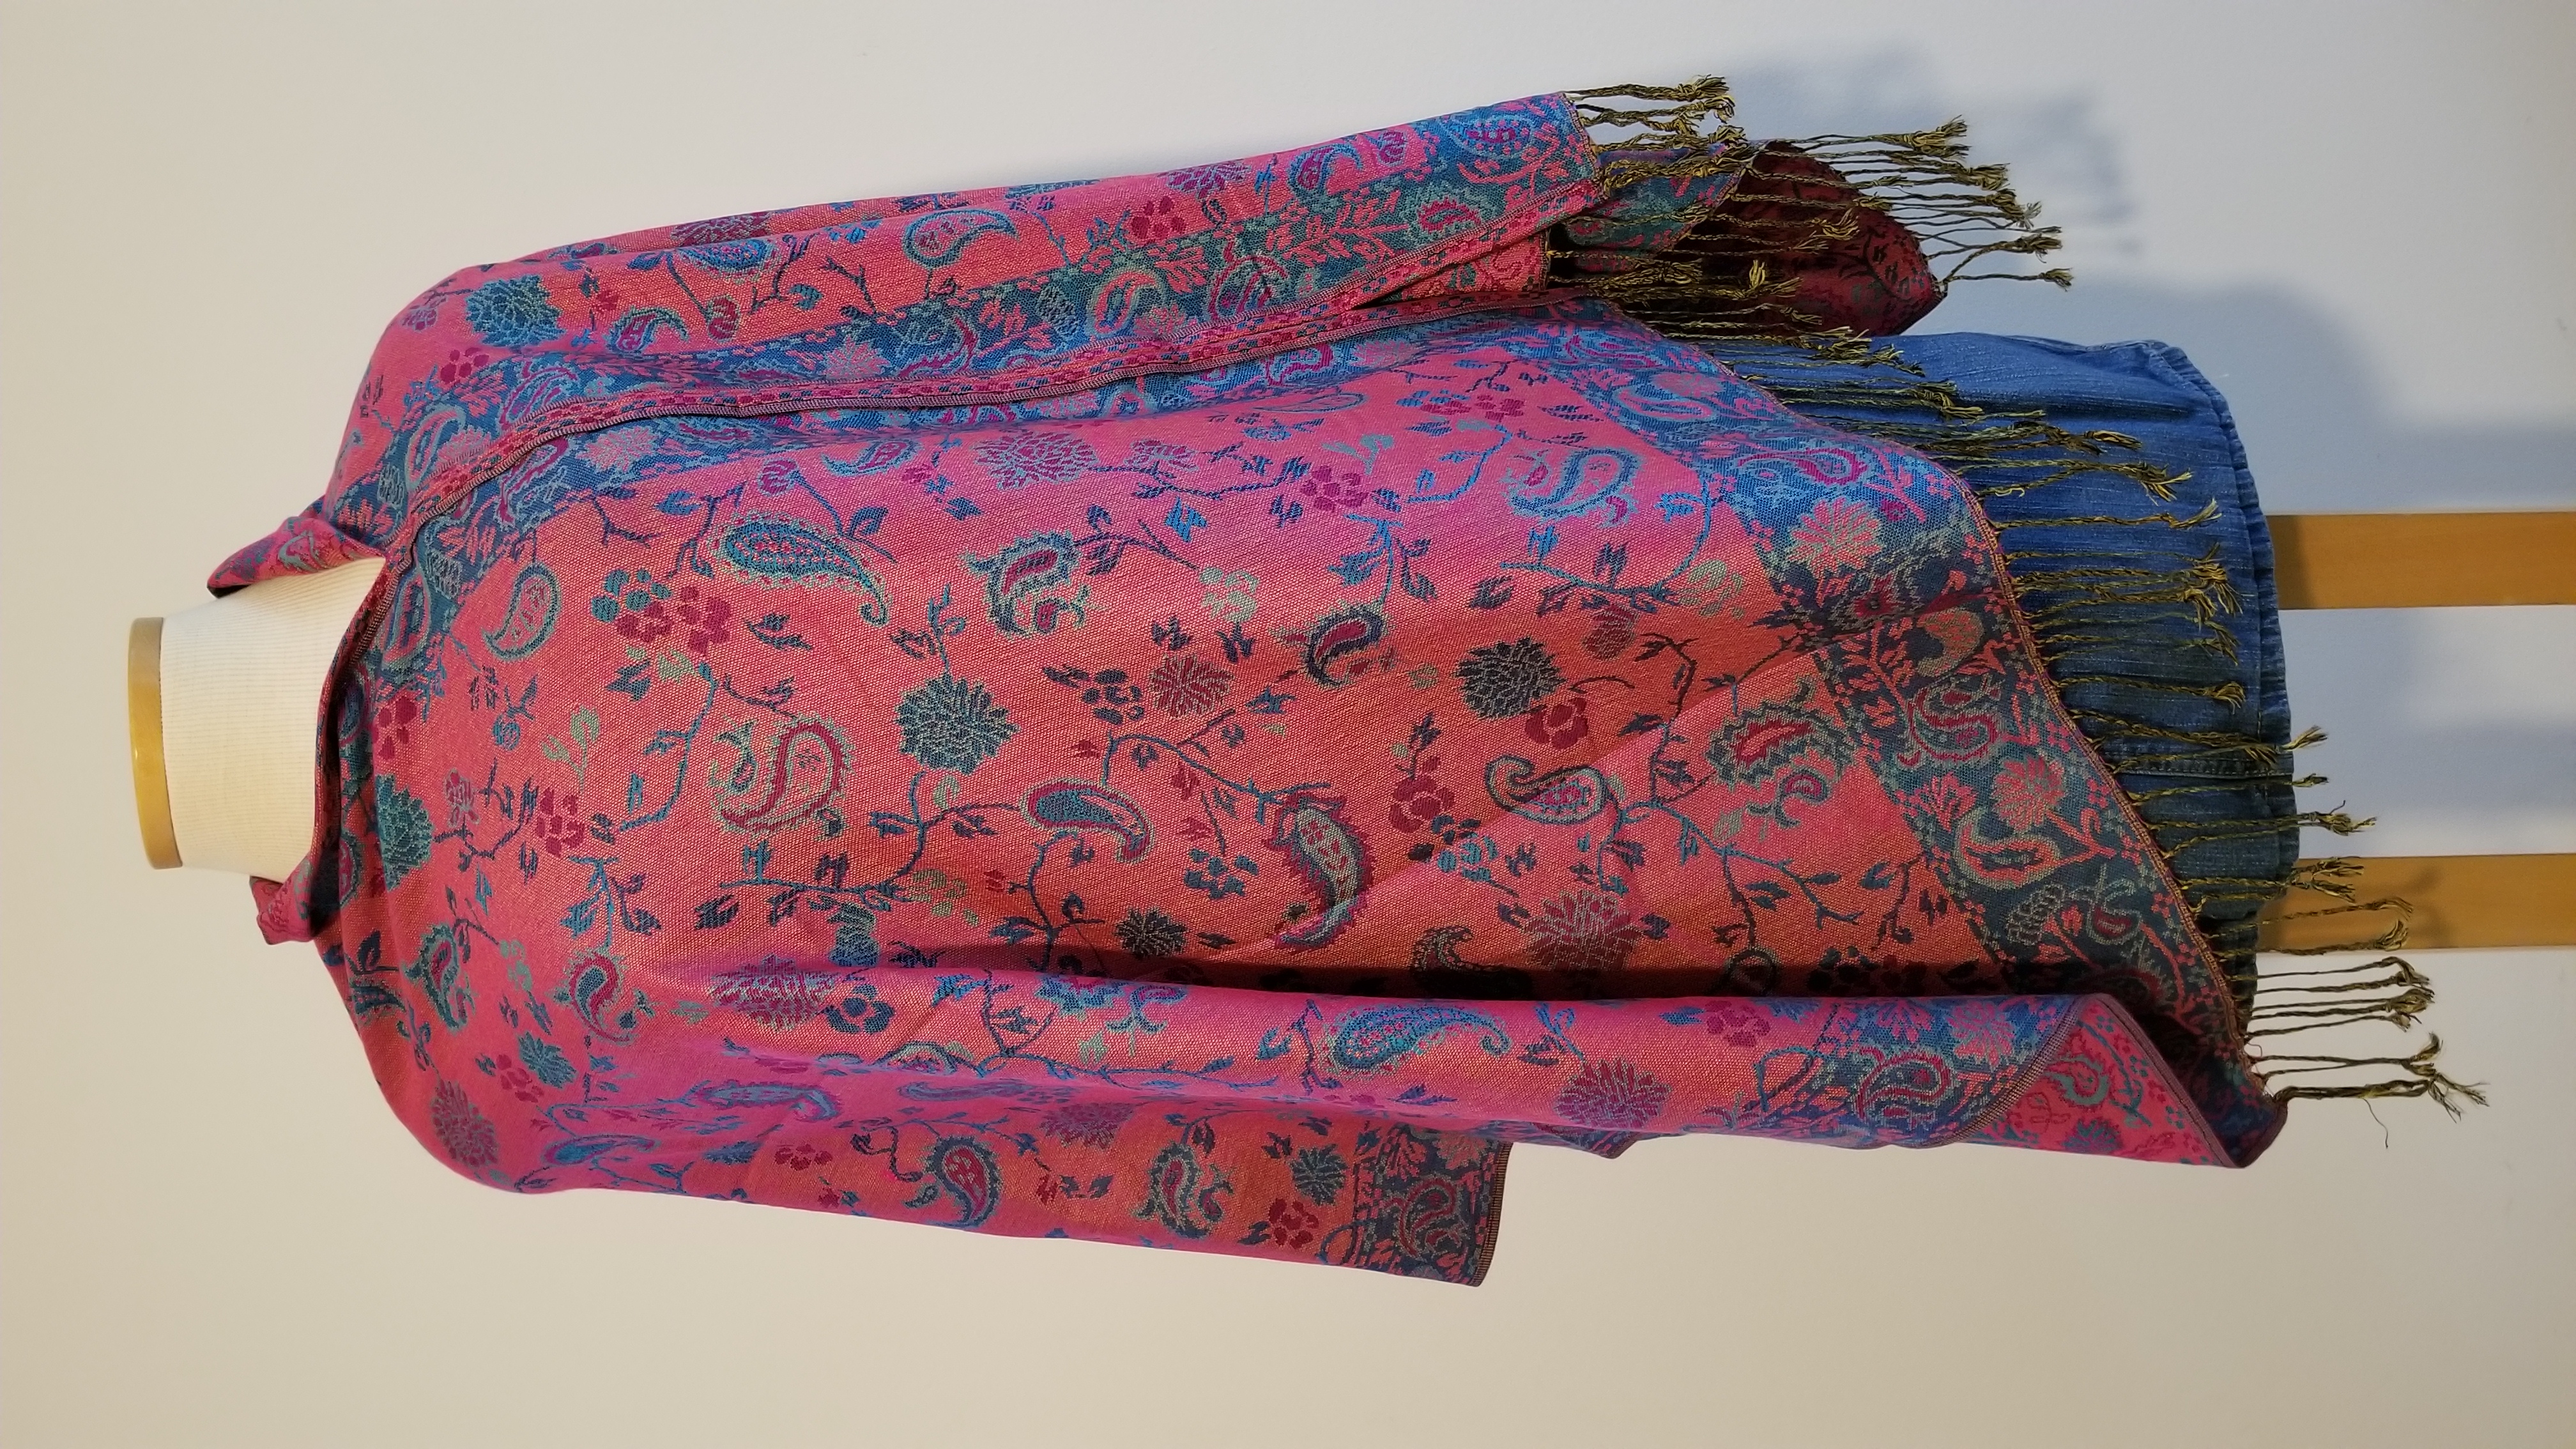 This Fuschia and Turquoise Paisley Flower Popover Reversible Shawlmina Shawl- Silk Blend - Fits most is made with love by The Creative Soul Sisters! Shop more unique gift ideas today with Spots Initiatives, the best way to support creators.